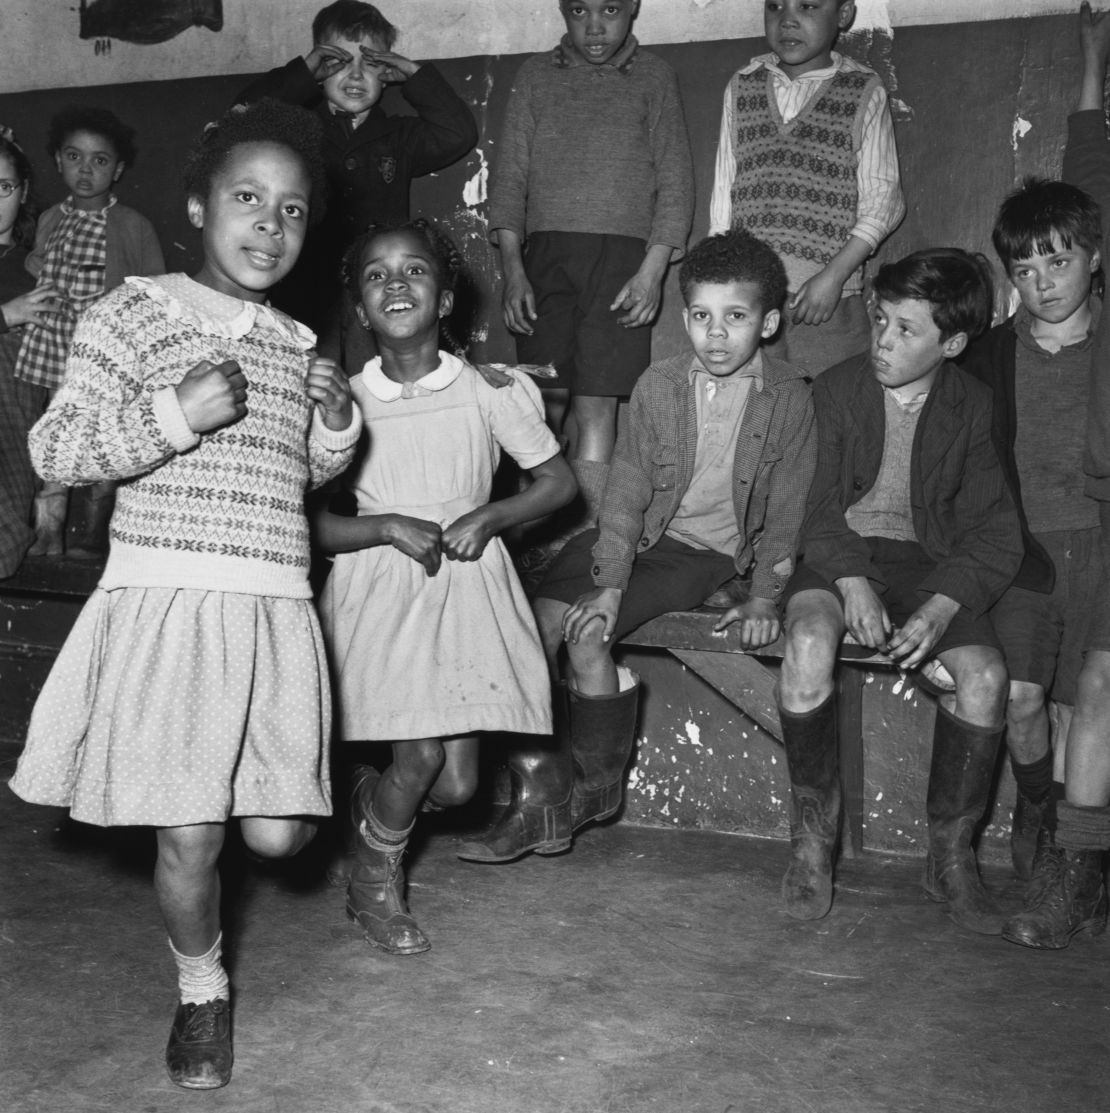 A group of children playing indoors in the Bute Town area of Cardiff, Wales, April 1950. Several boys wear Wellington boots and a couple of the children wear Fair Isle pattern knitted tops. Original Publication: Picture Post - 5020 - Down The Bay - pub. 22nd April 1950 (Photo by Bert Hardy/Picture Post/Hulton Archive/Getty Images)